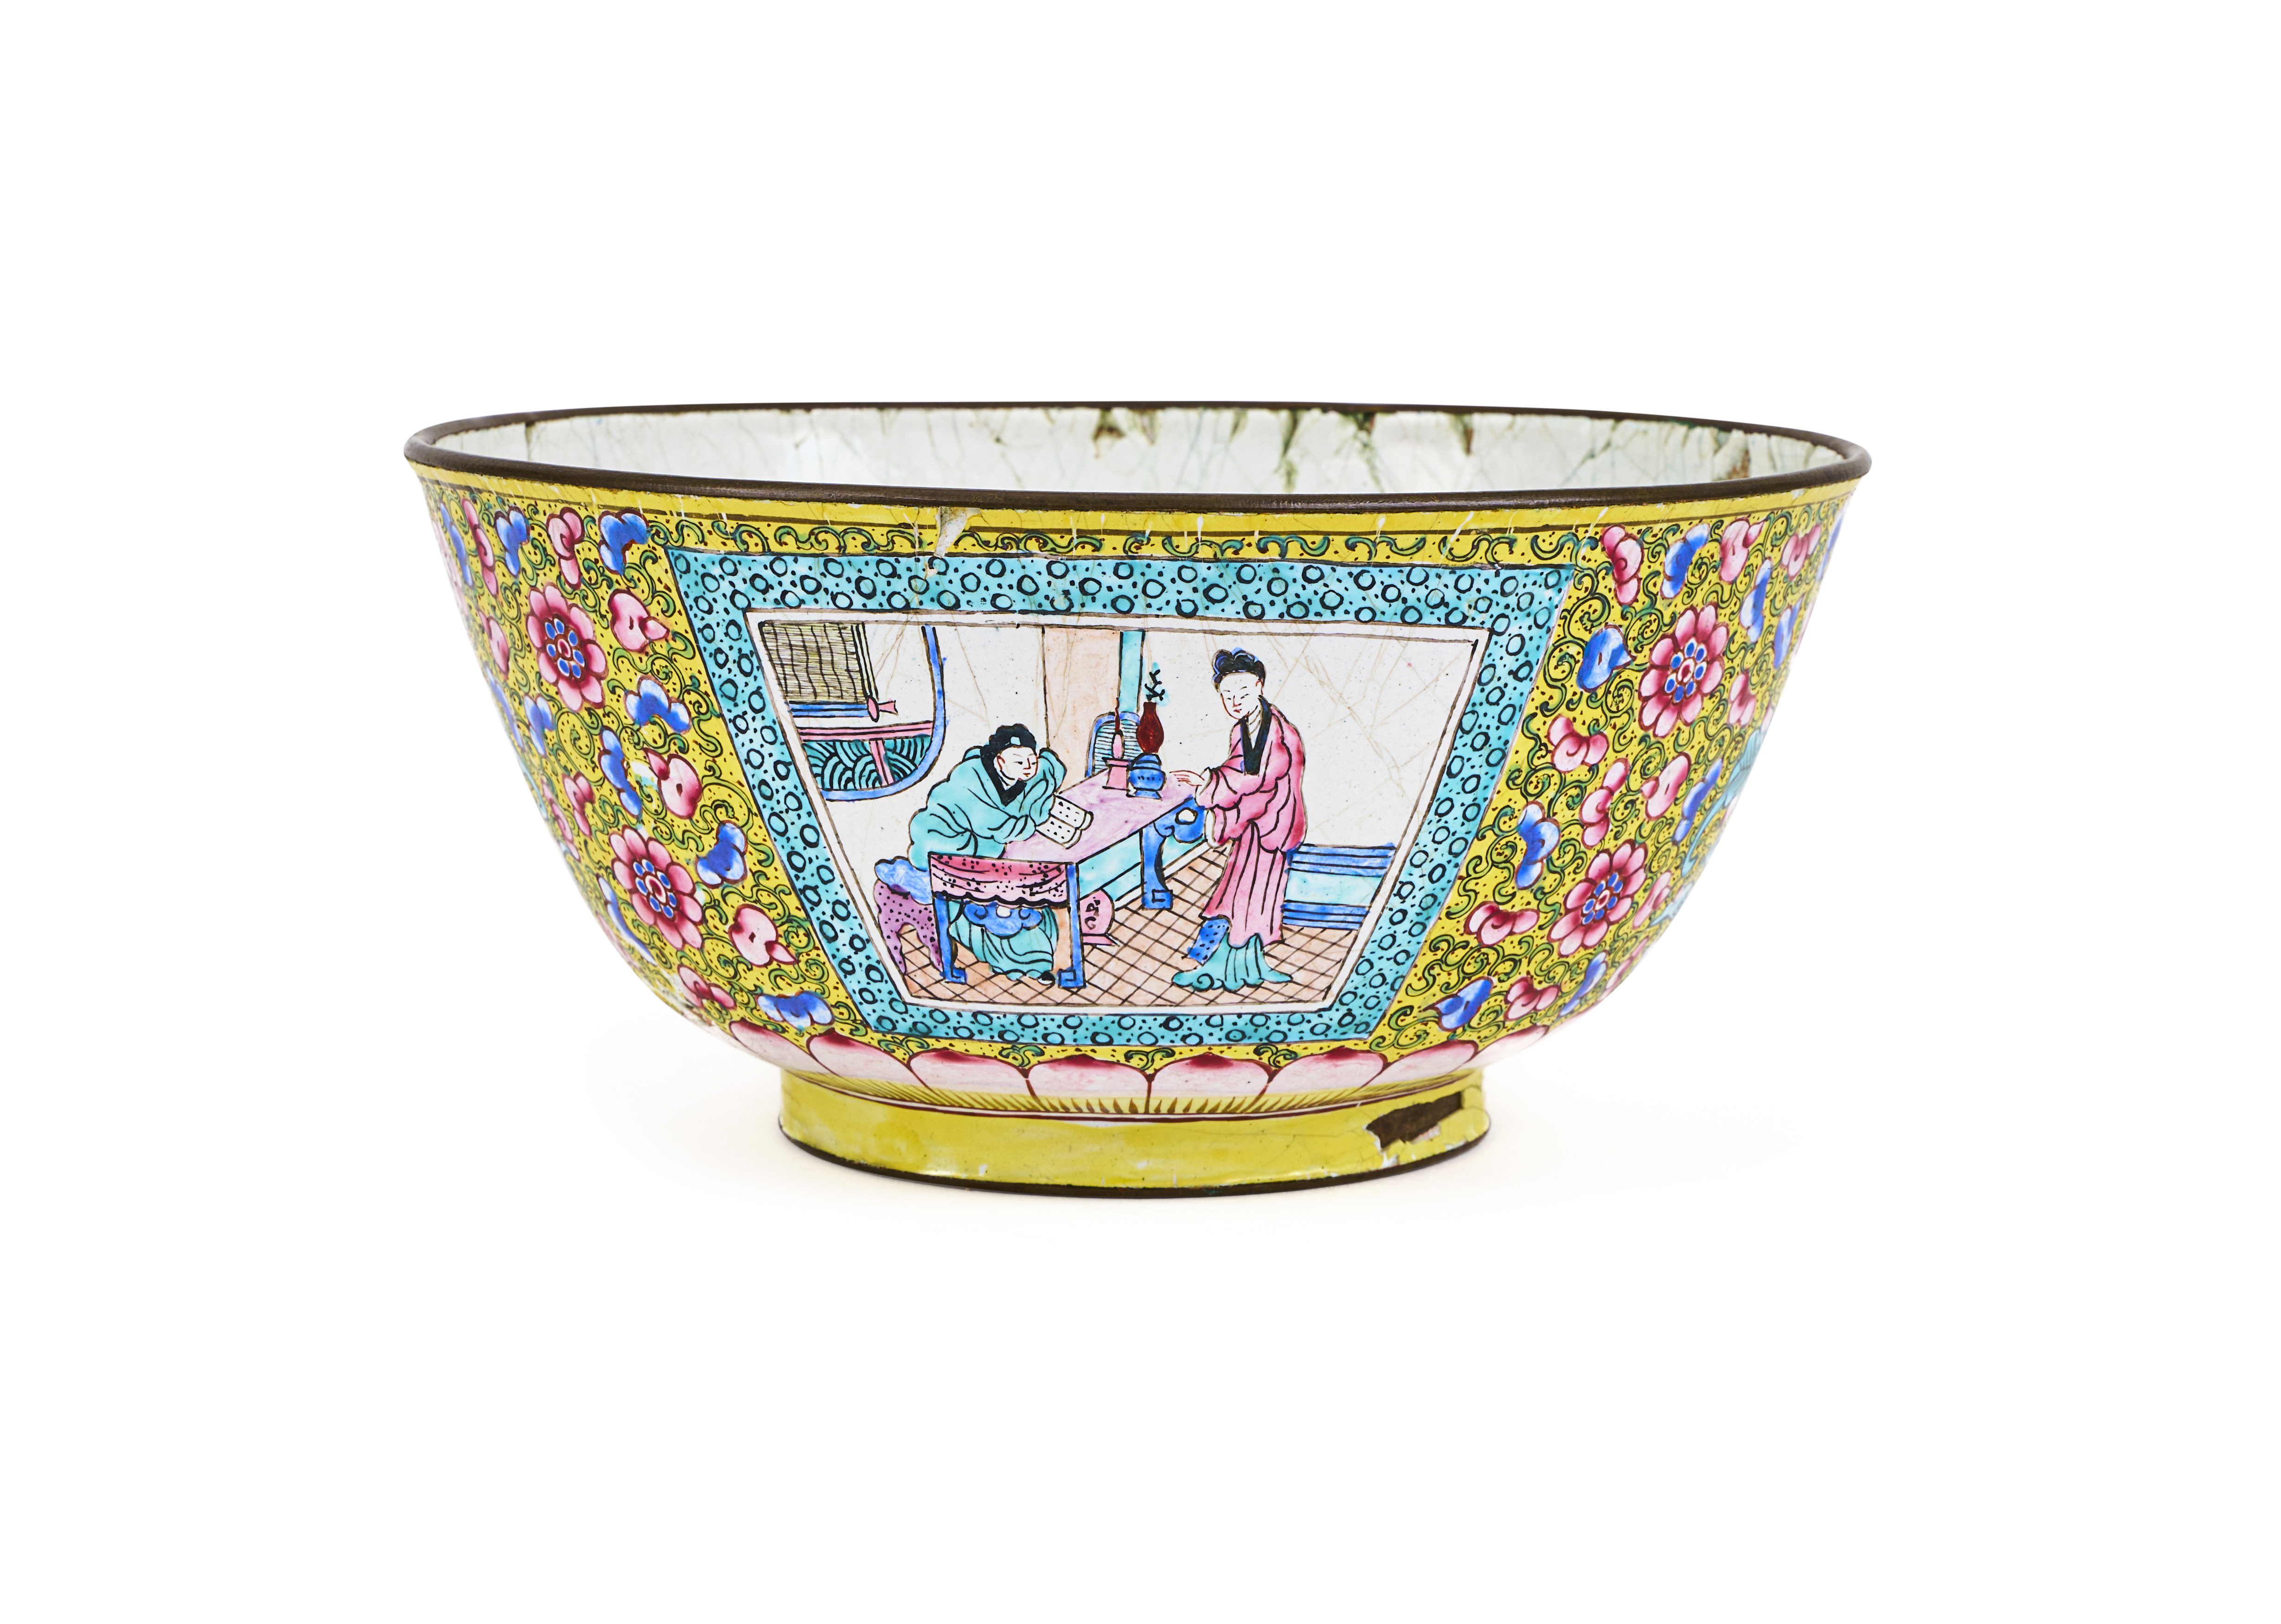 A CHINESE CANTON ENAMEL BOWL AND A LIDDED BOX, QING DYNASTY (1644-1911) - Image 3 of 12